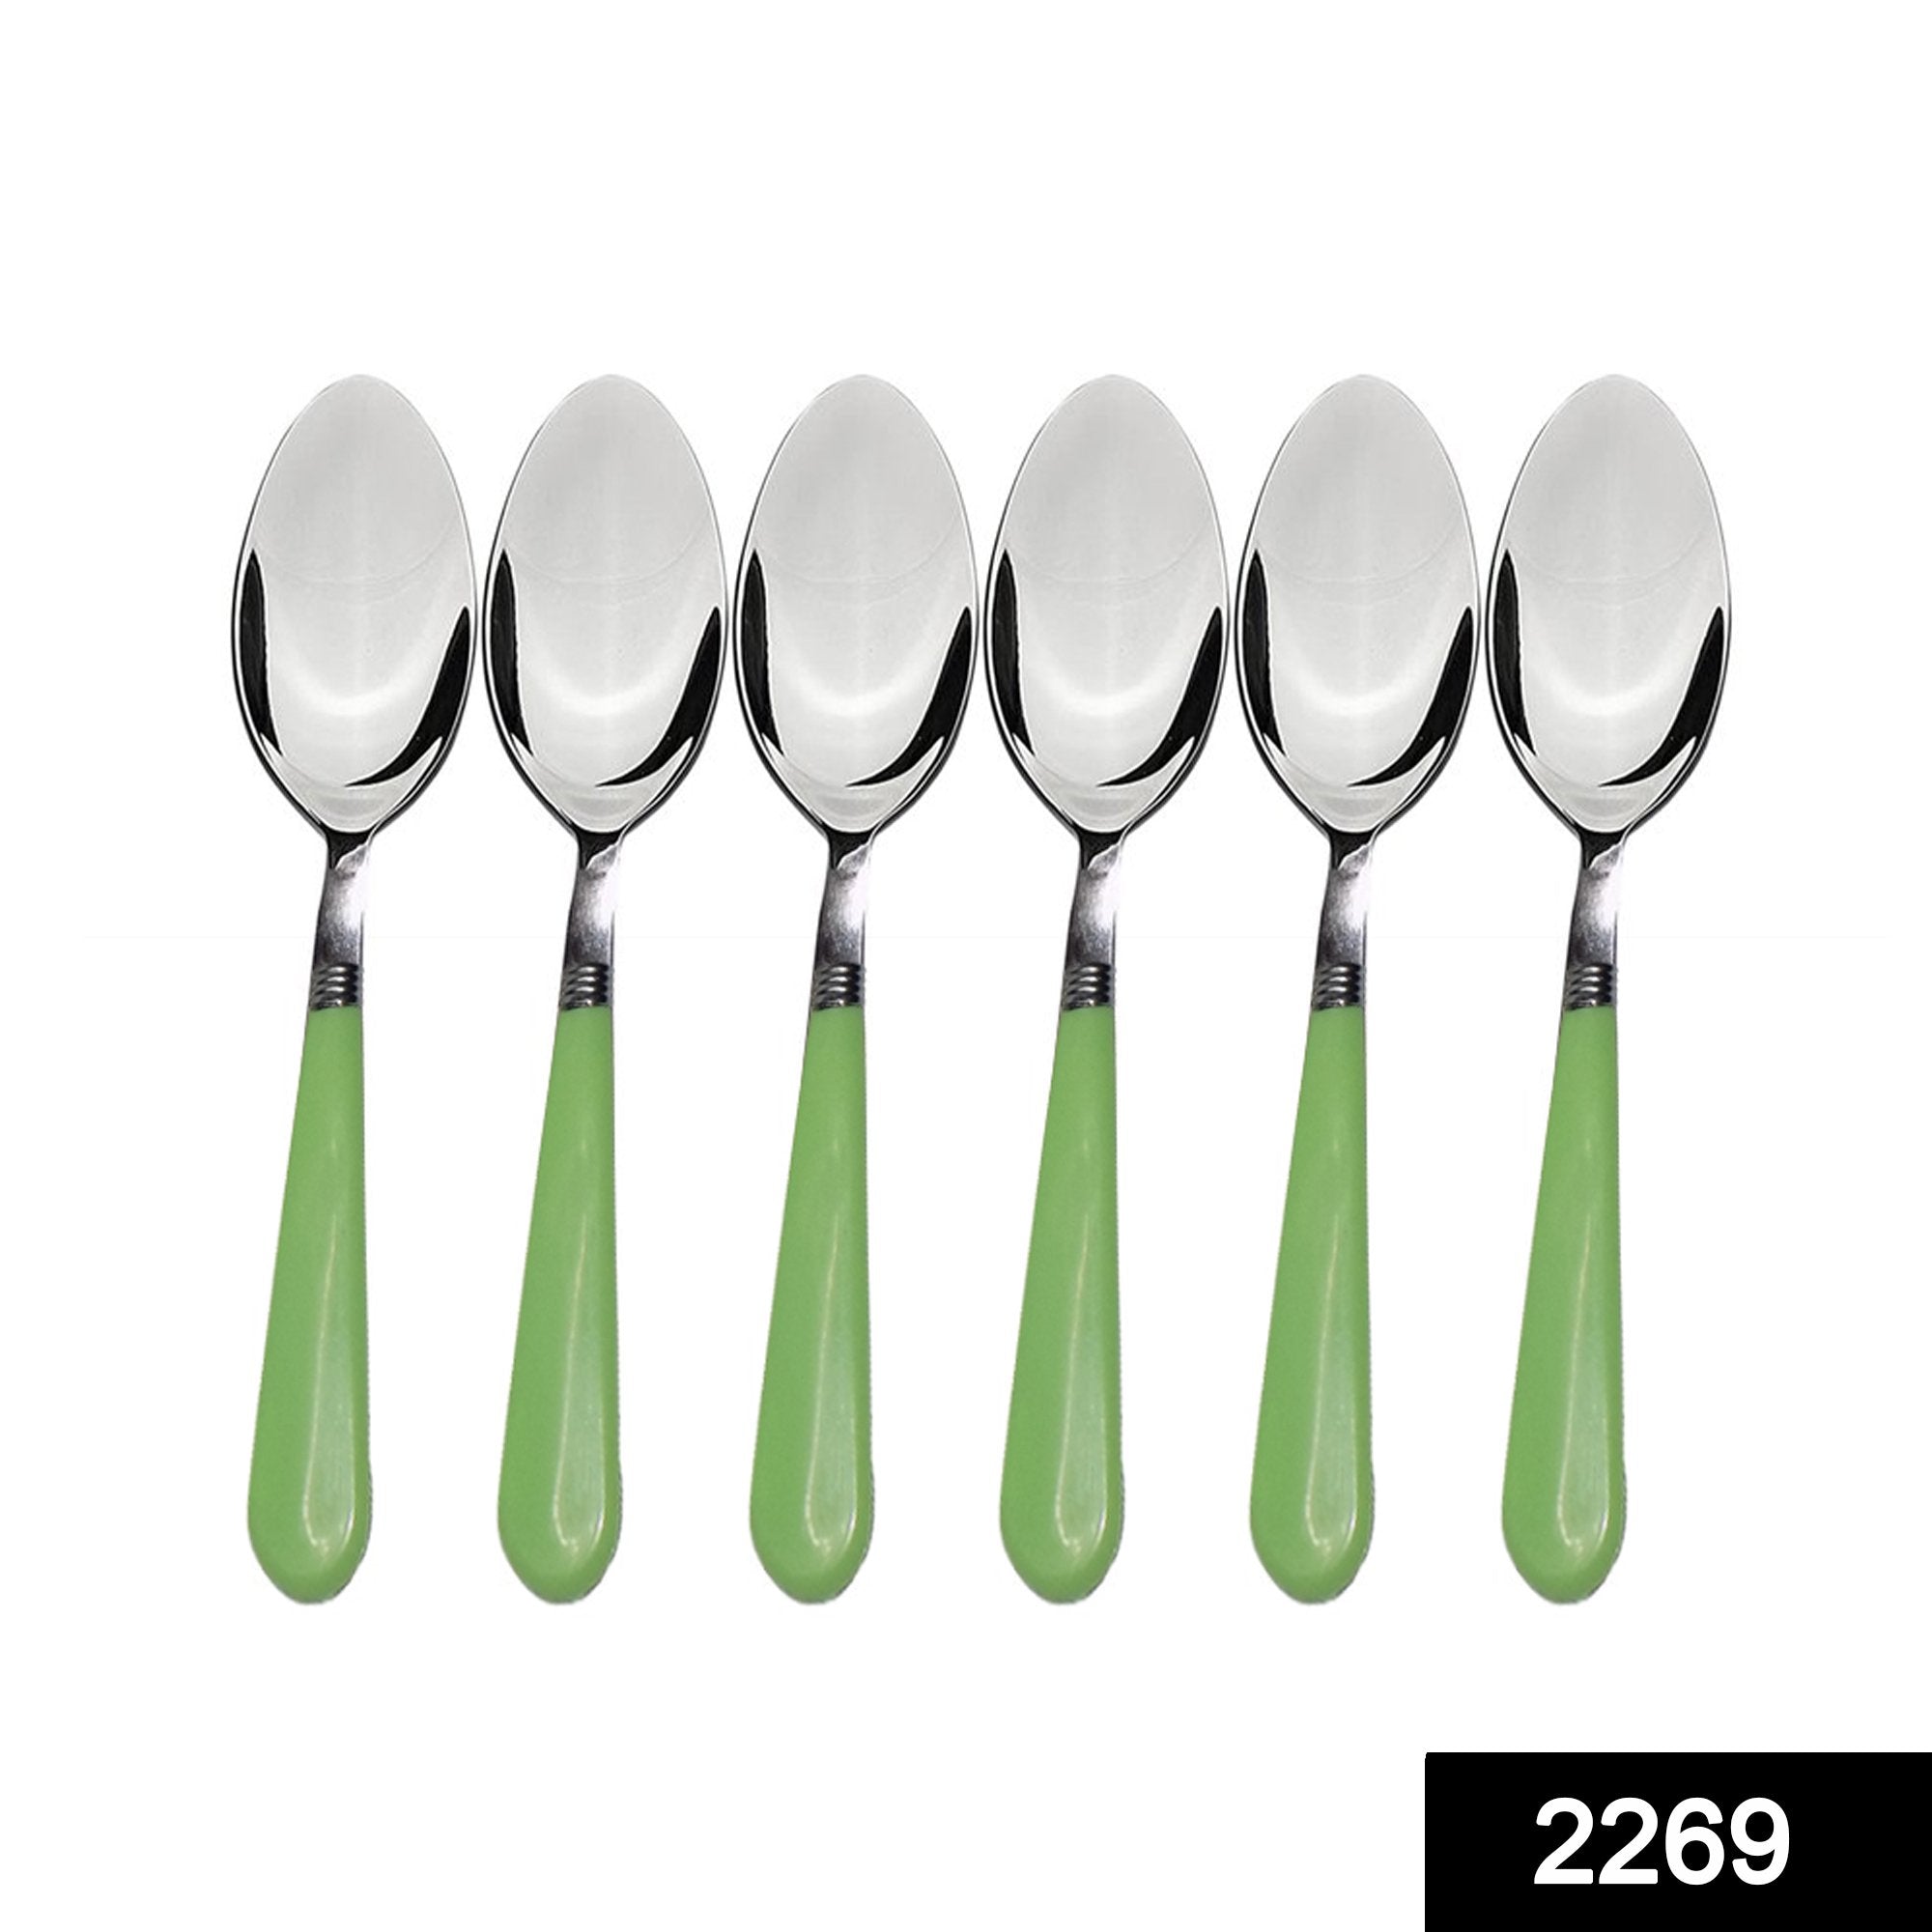 2269 Stainless Steel Spoon with Comfortable Grip Dining Spoon Set of 6 Pcs - SkyShopy